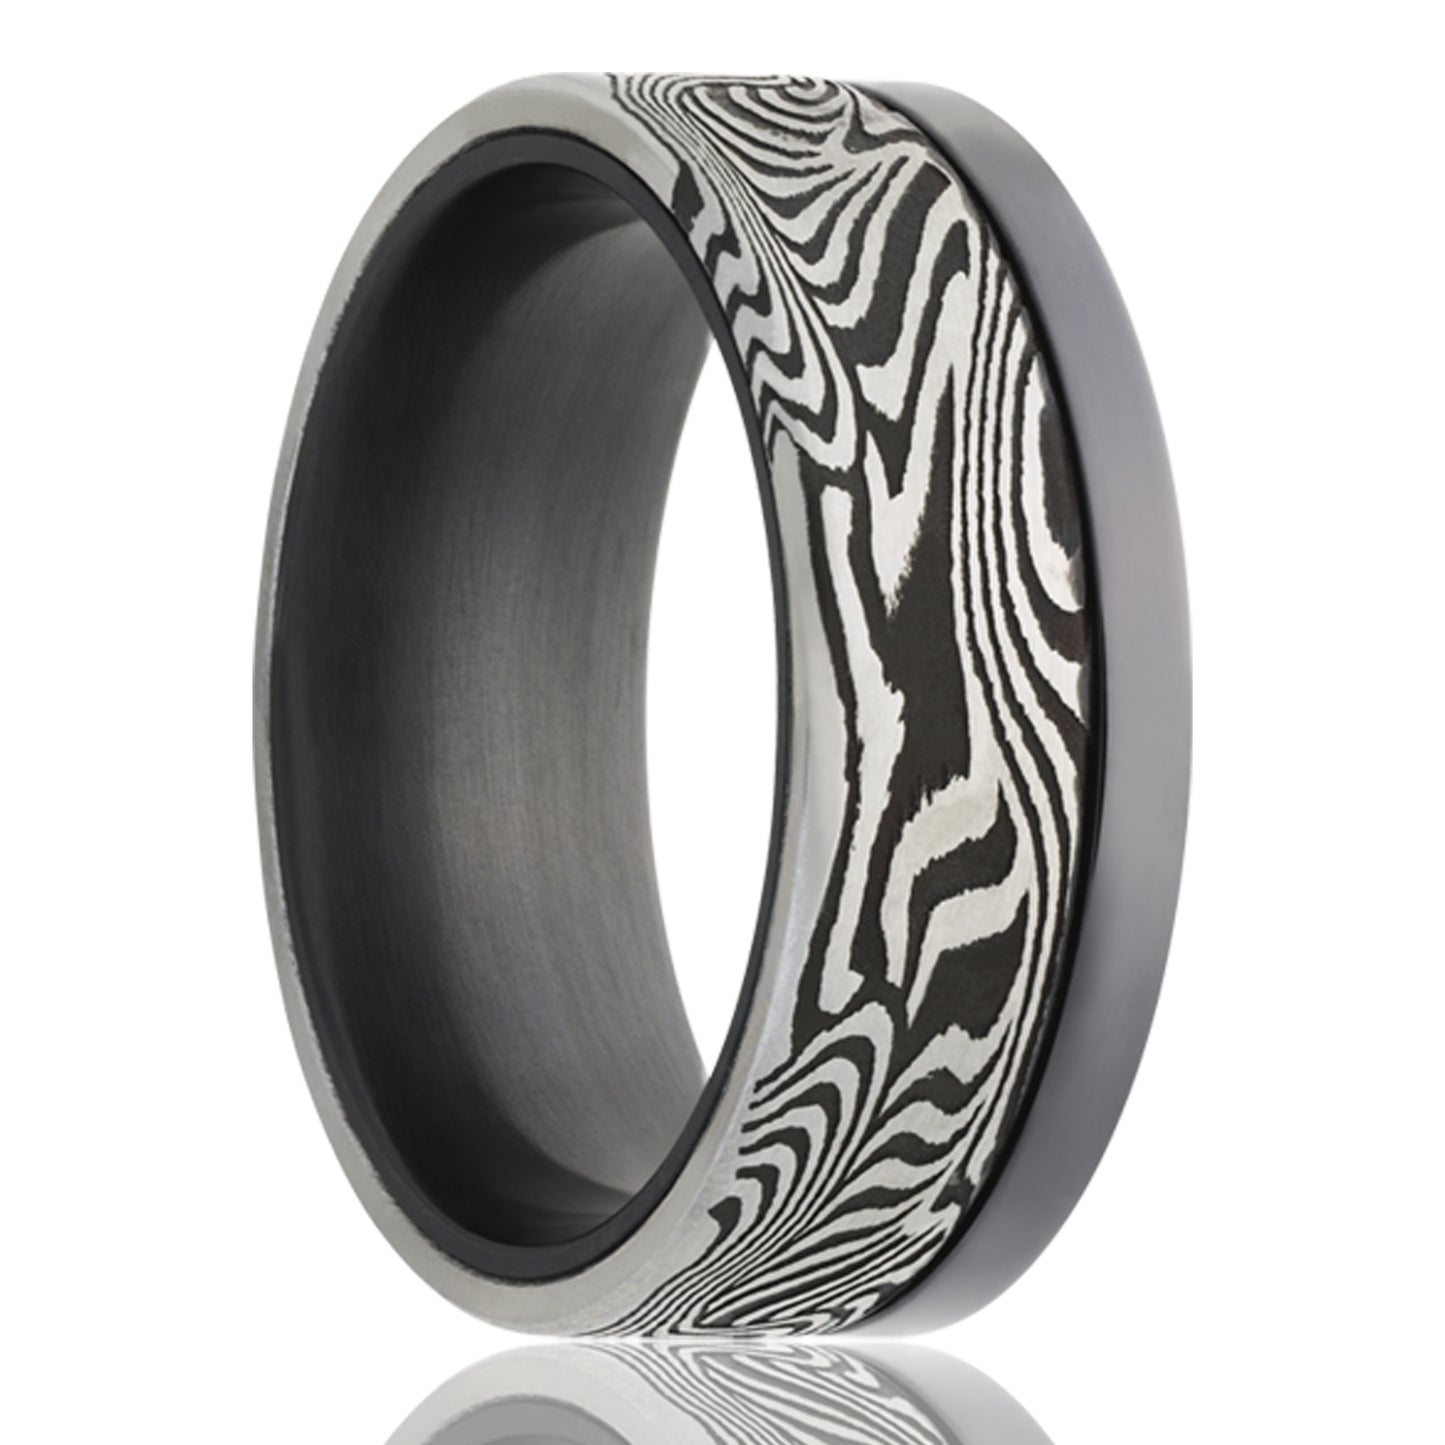 A asymmetrical groove damascus steel & zirconium men's wedding band displayed on a neutral white background.